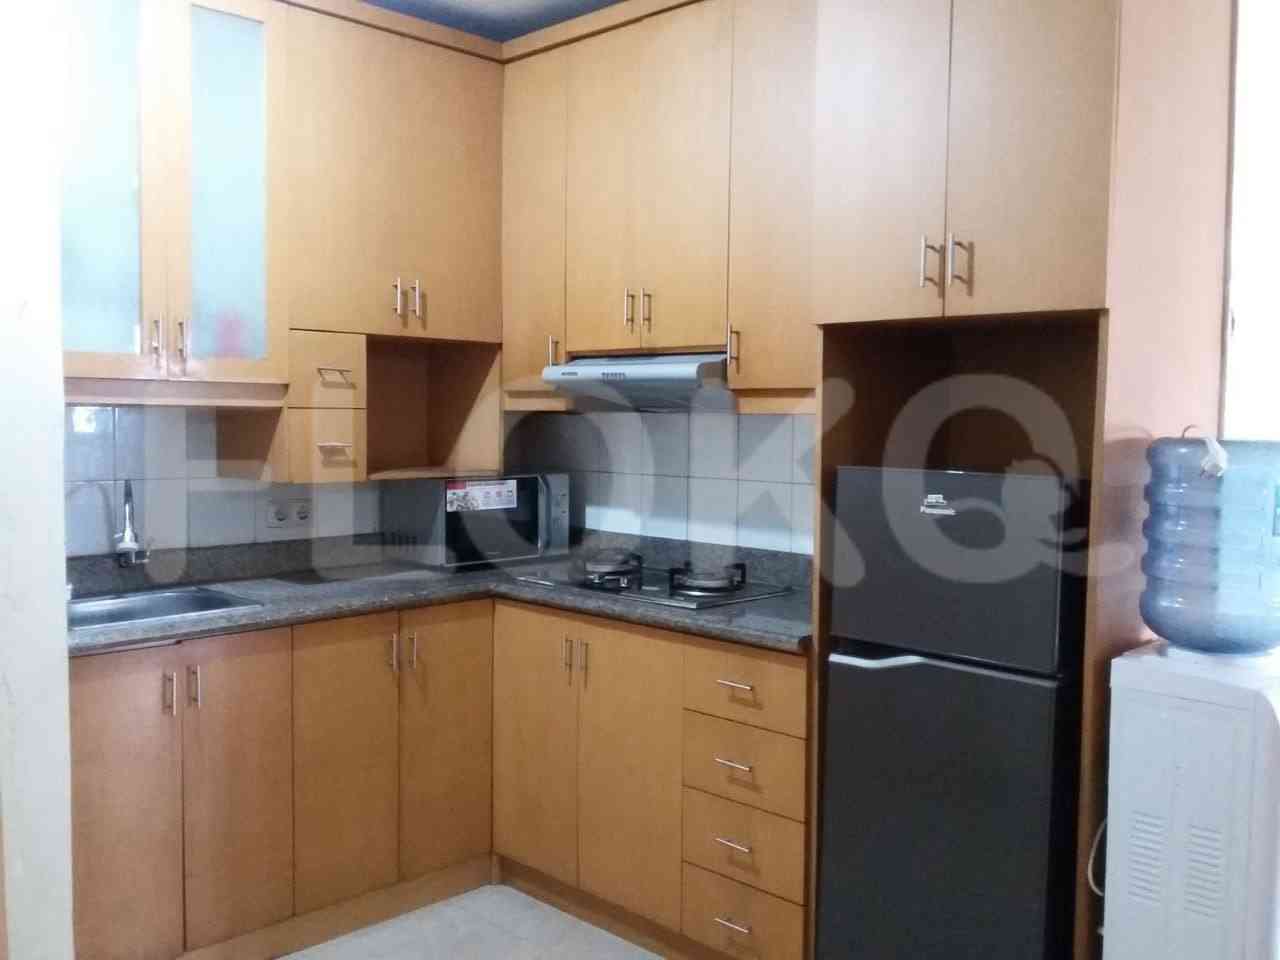 2 Bedroom on 18th Floor for Rent in Permata Senayan Apartment - fpafc3 5